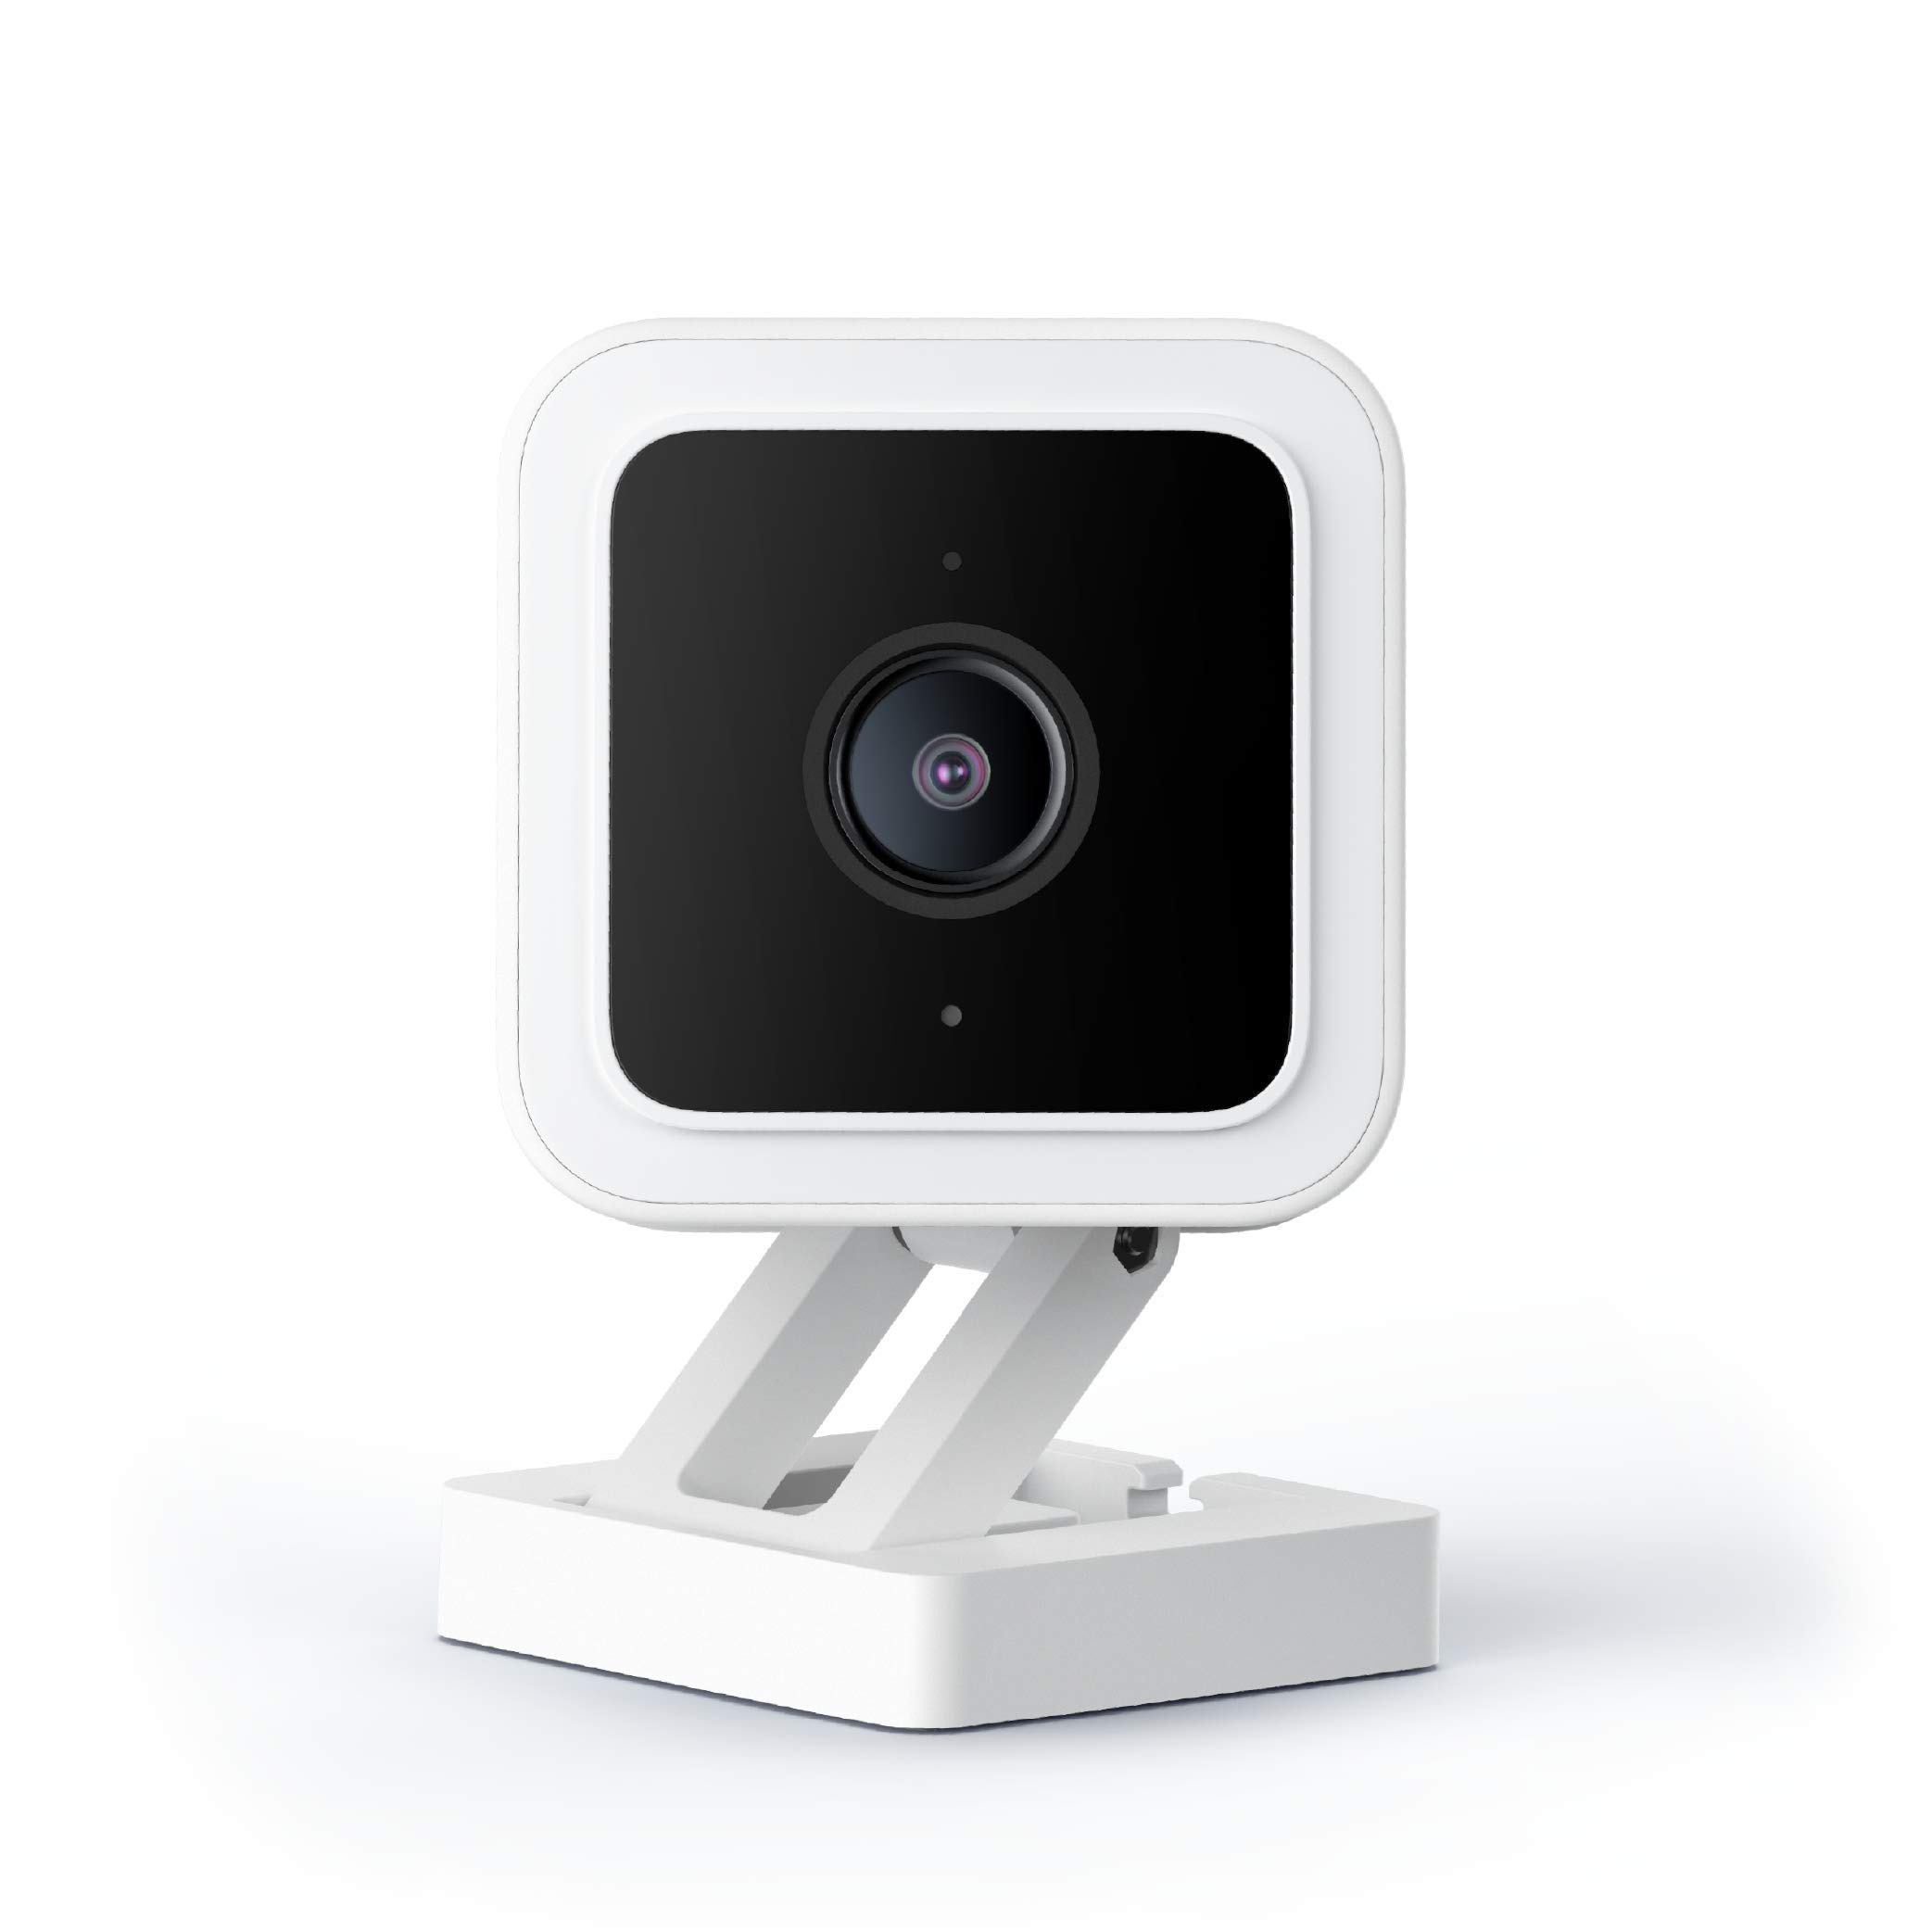 Wyze cam v3 for $30.73 at Amazon